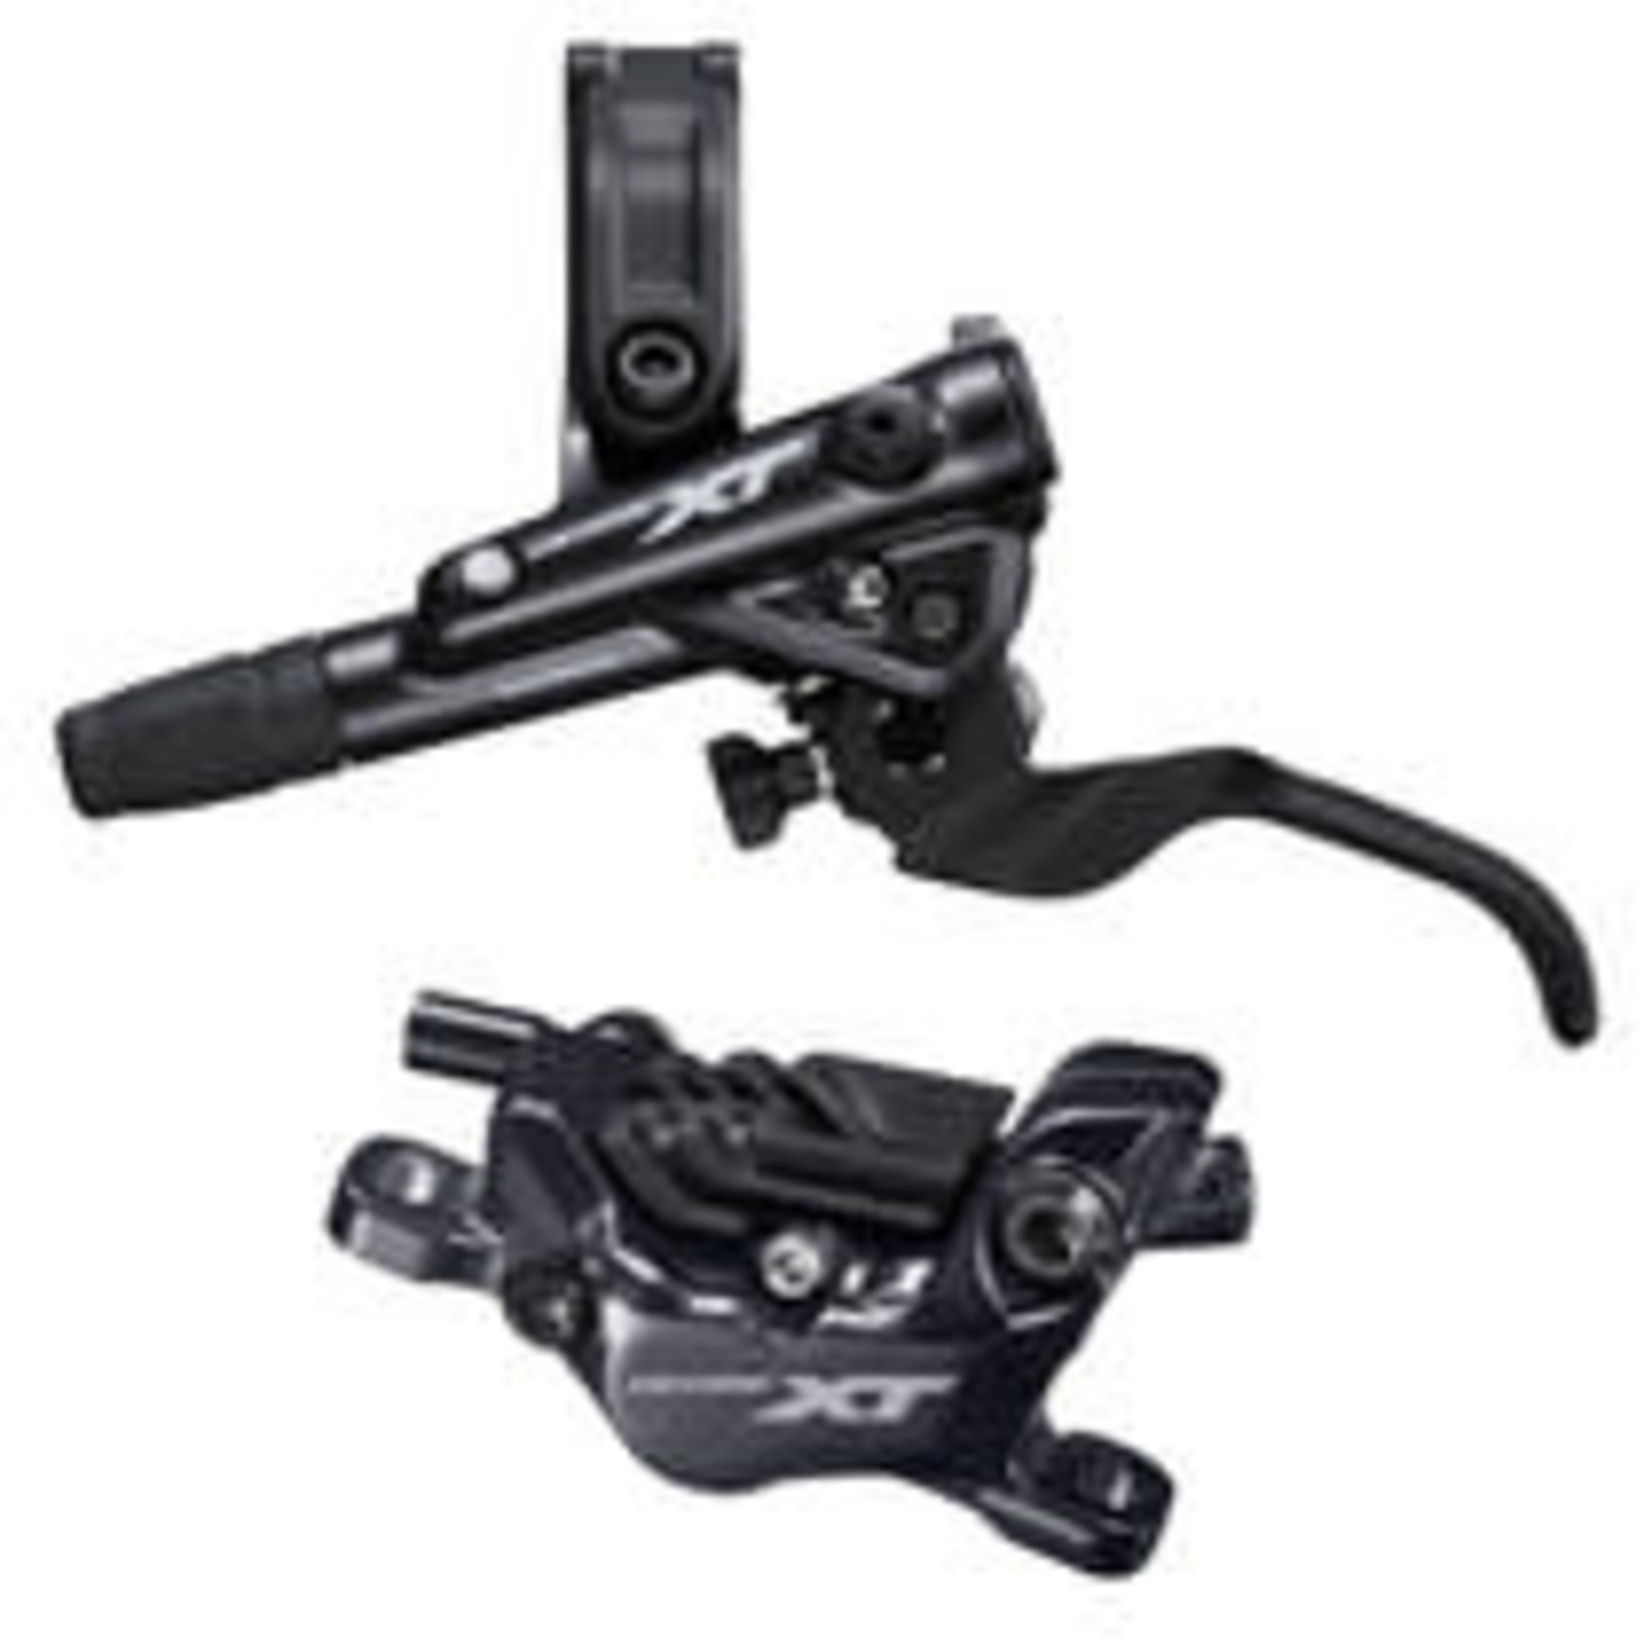 Shimano Deore XT BL-M8100/BR-M8120 Disc Brake and Lever - Front Hydraulic Post Mount 4-Piston Finned Metal Pads Black